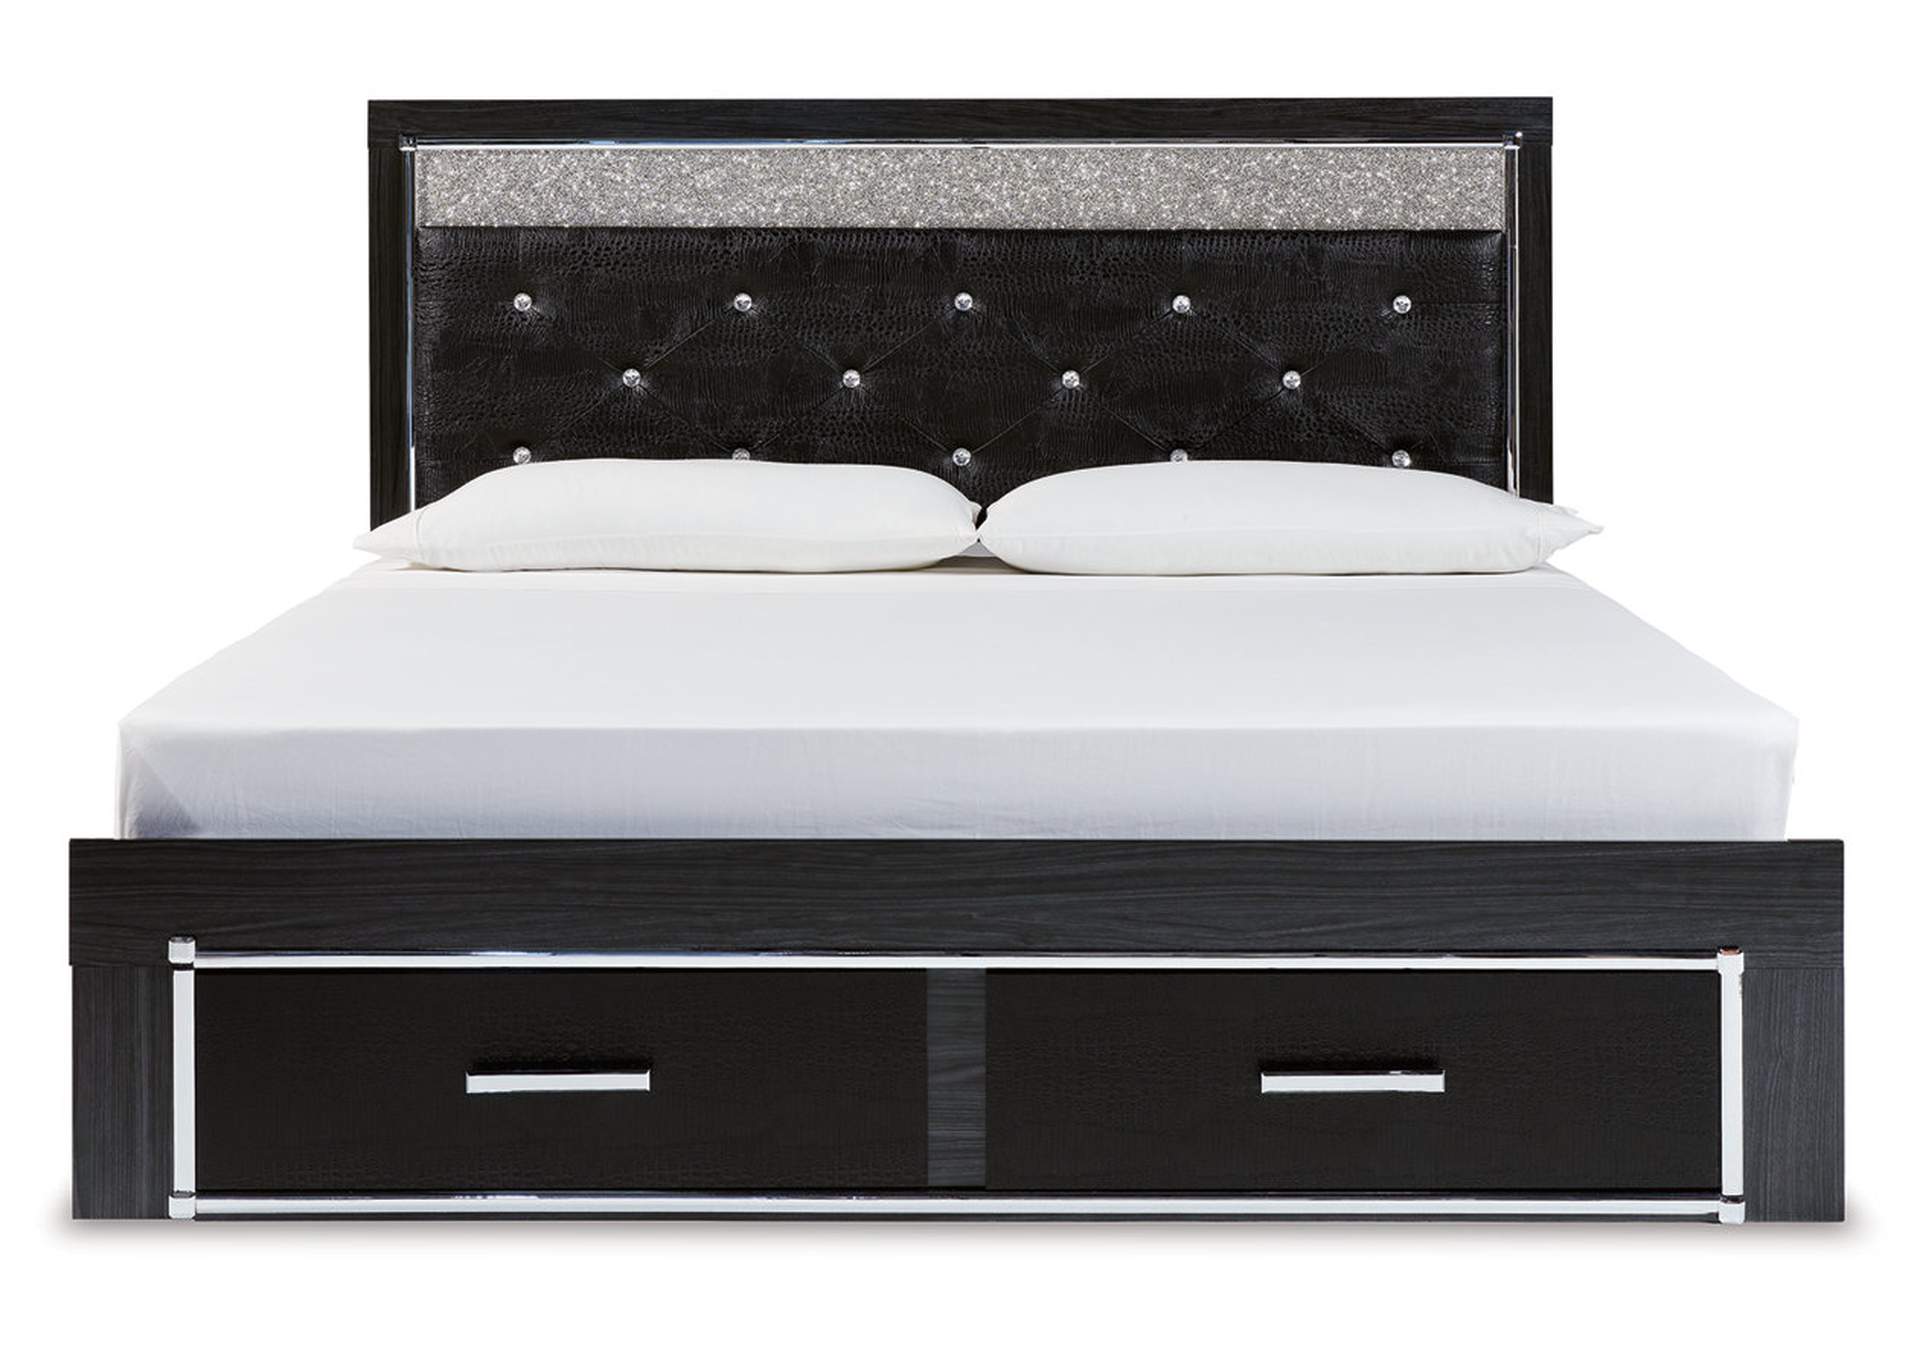 Kaydell King Upholstered Panel Storage Bed,Signature Design By Ashley